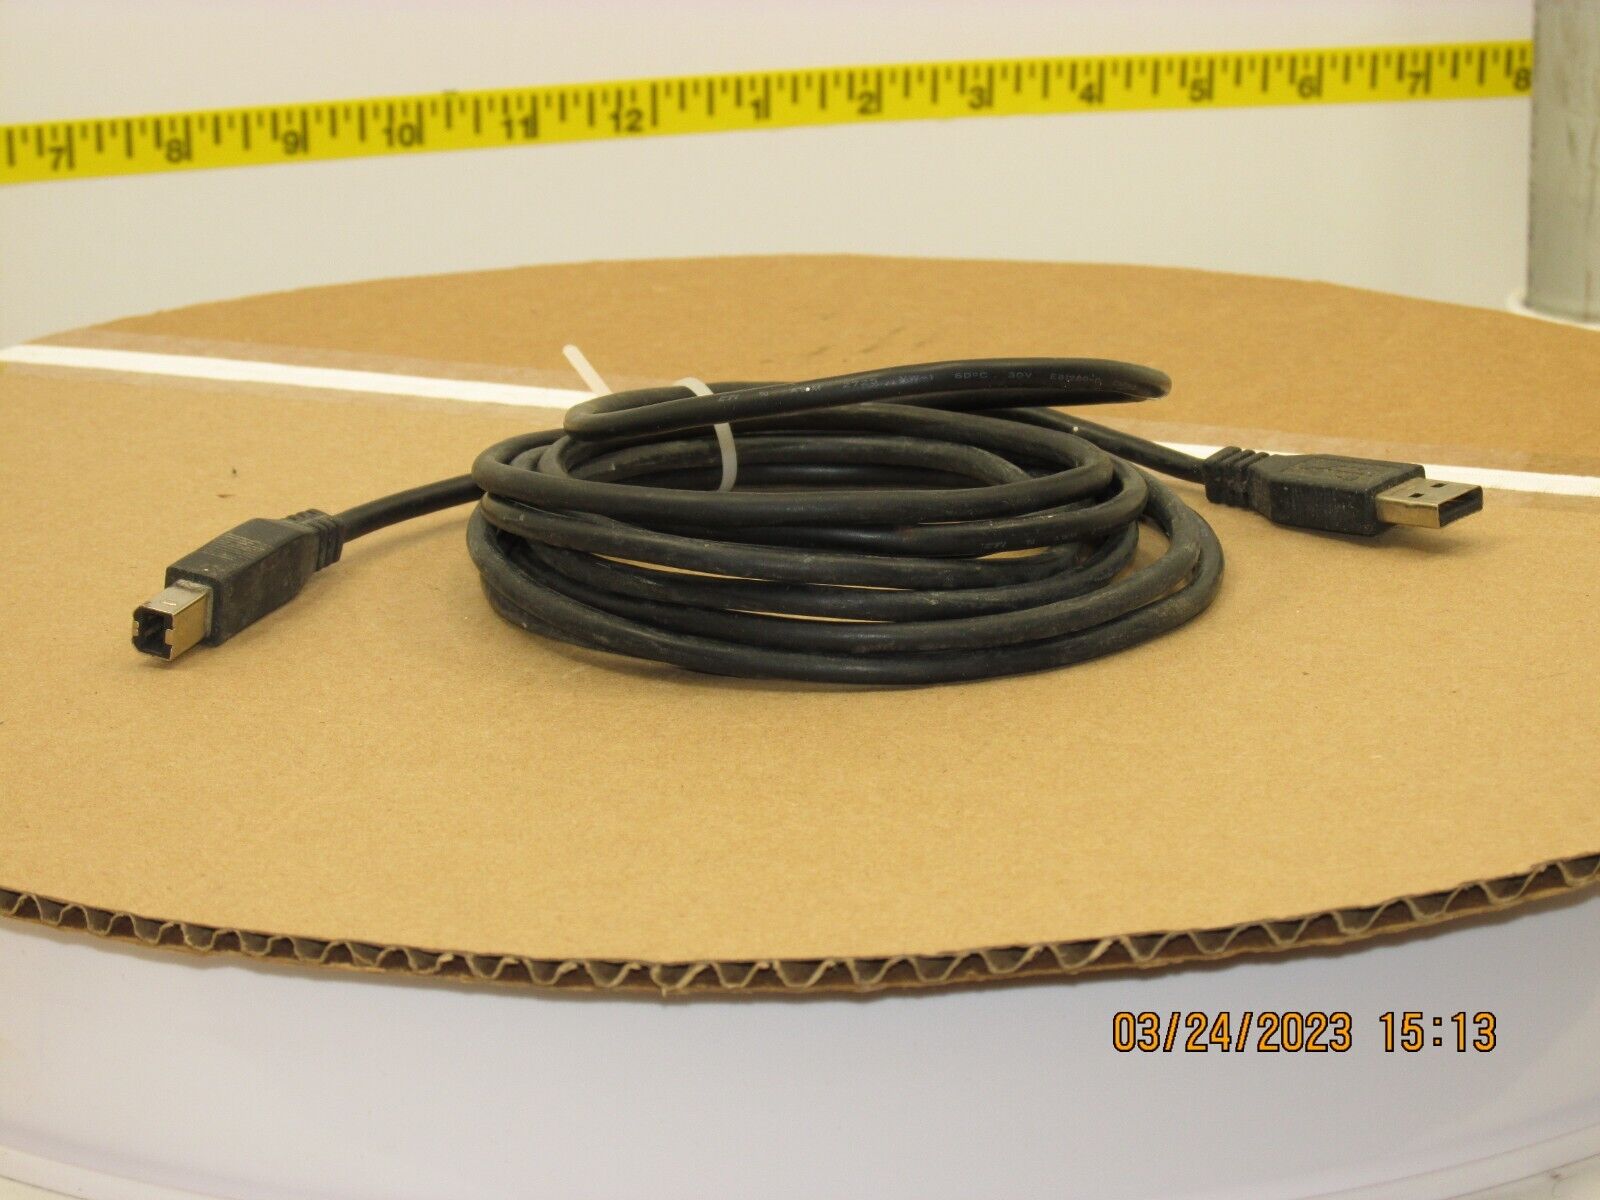 The listing is for: USB Cable-USB A to USB B Cable-M/M-110\